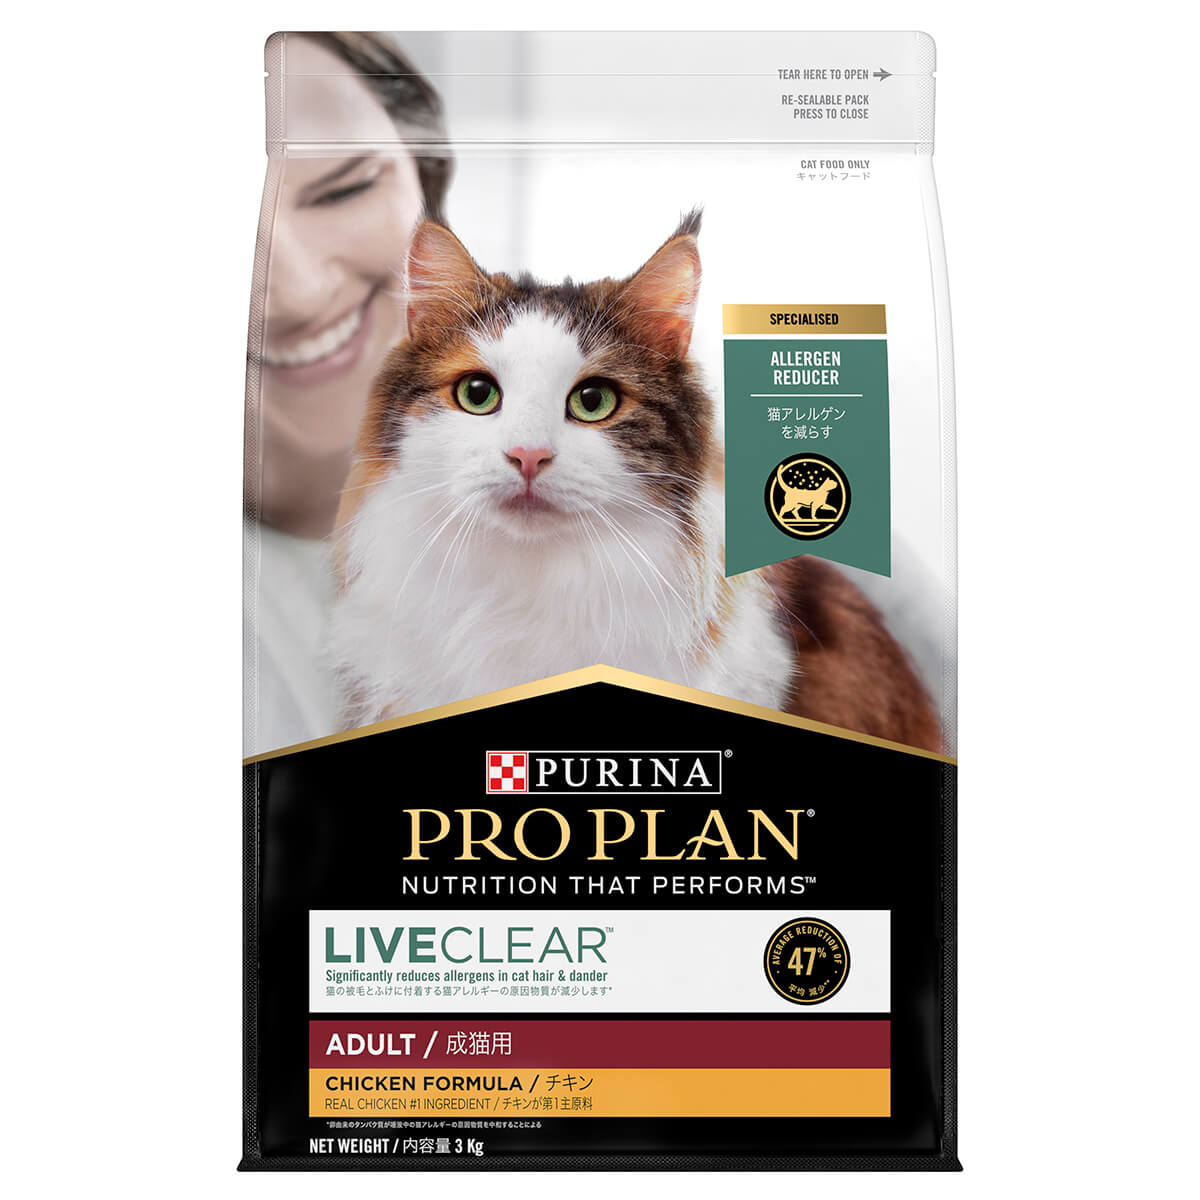 Pro Plan Live Clear Adult Chicken Dry Cat Food (100000052963) [default_color]